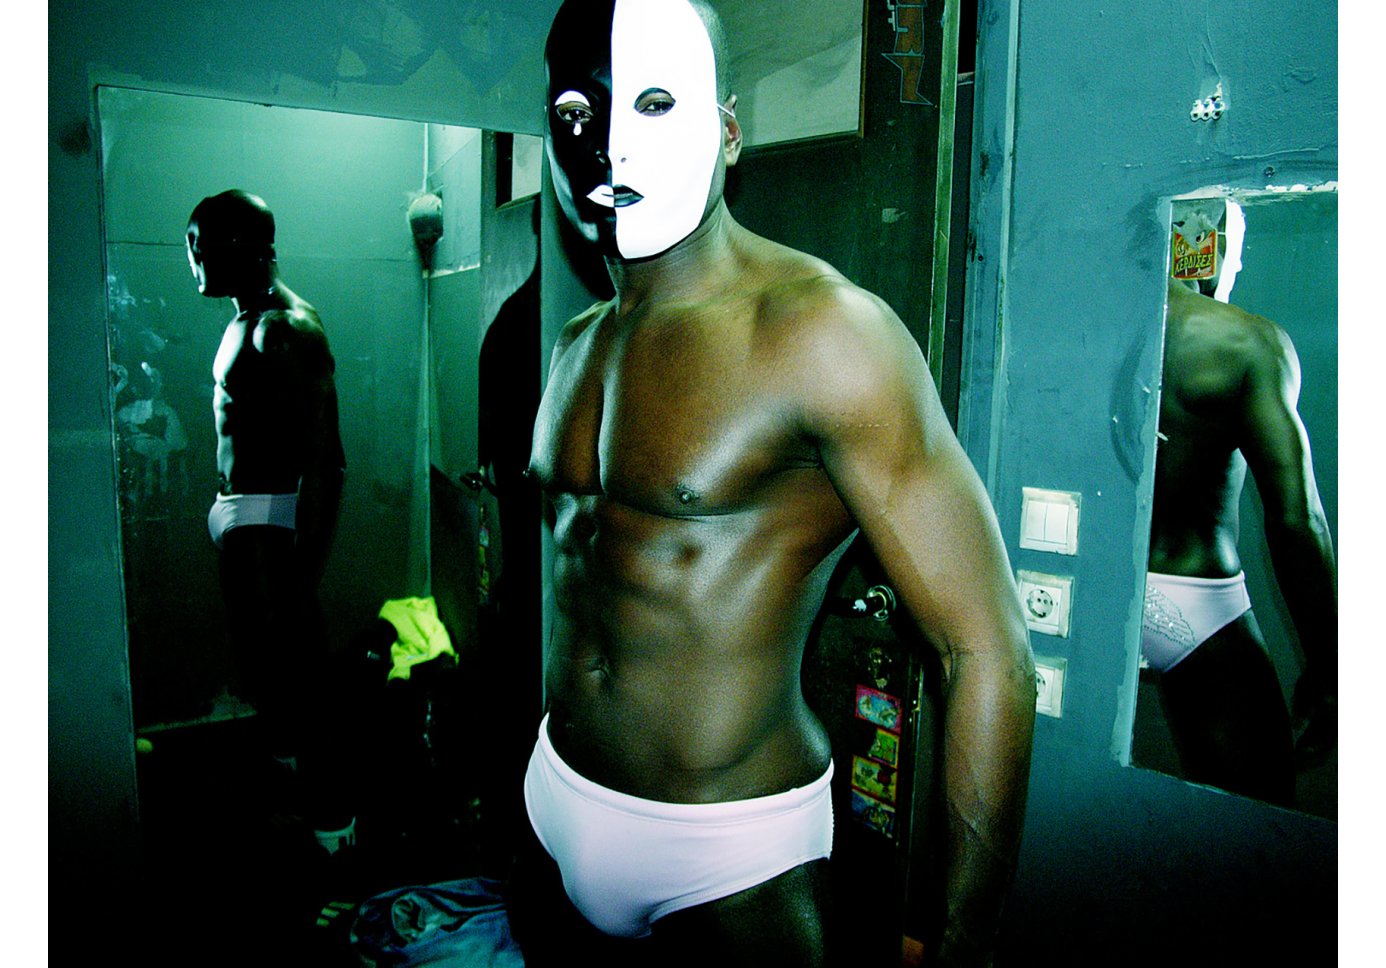 A black man wearing white underwear and a black and white face mask